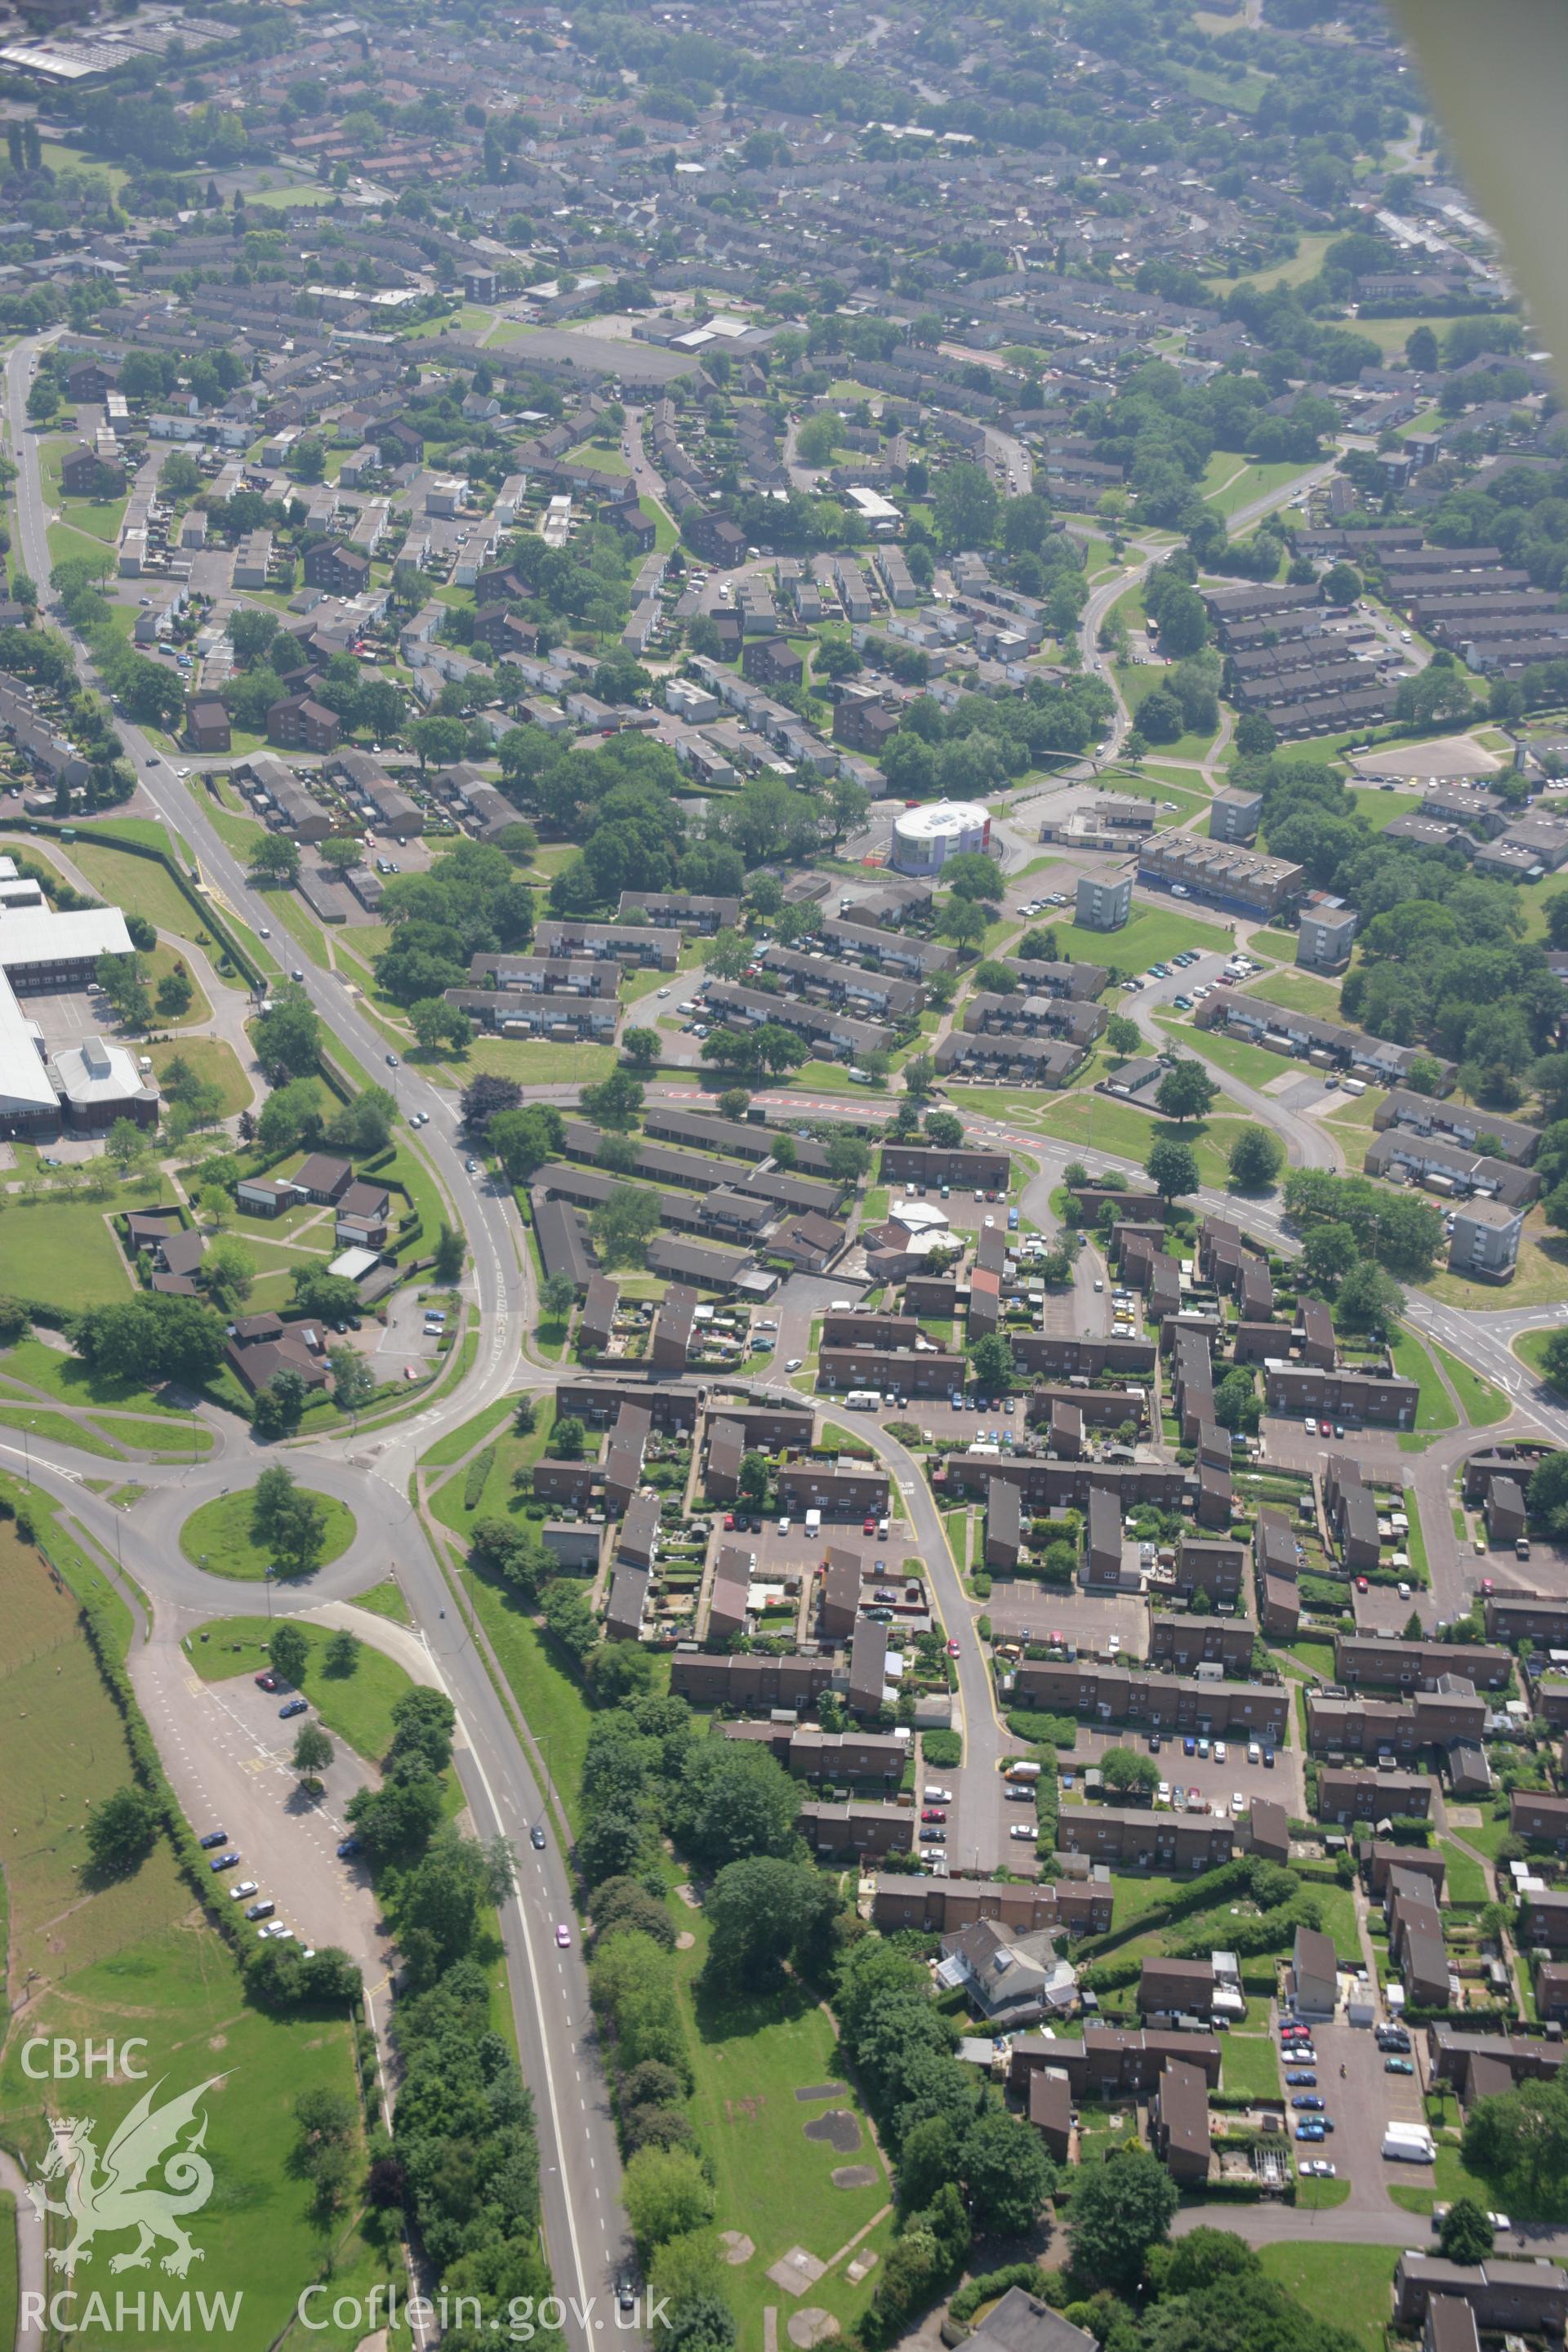 RCAHMW colour oblique aerial photograph of the Green Meadow Housing Estate at Cwmbran from the north-west. Taken on 09 June 2006 by Toby Driver.